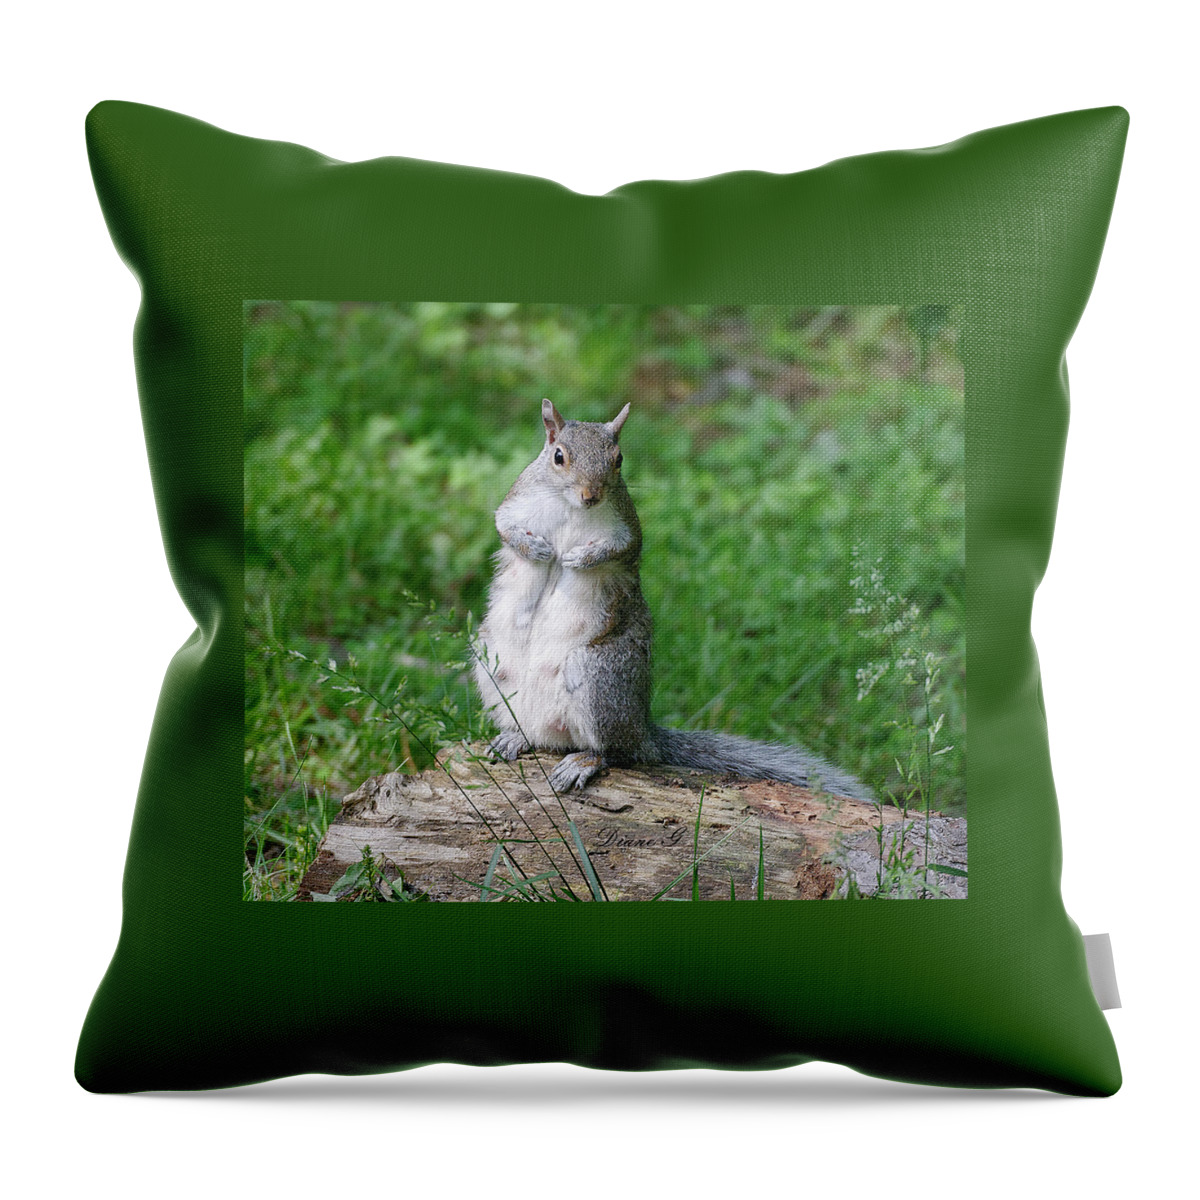 Mama Squirrel Throw Pillow featuring the photograph Mama Squirrel by Diane Giurco